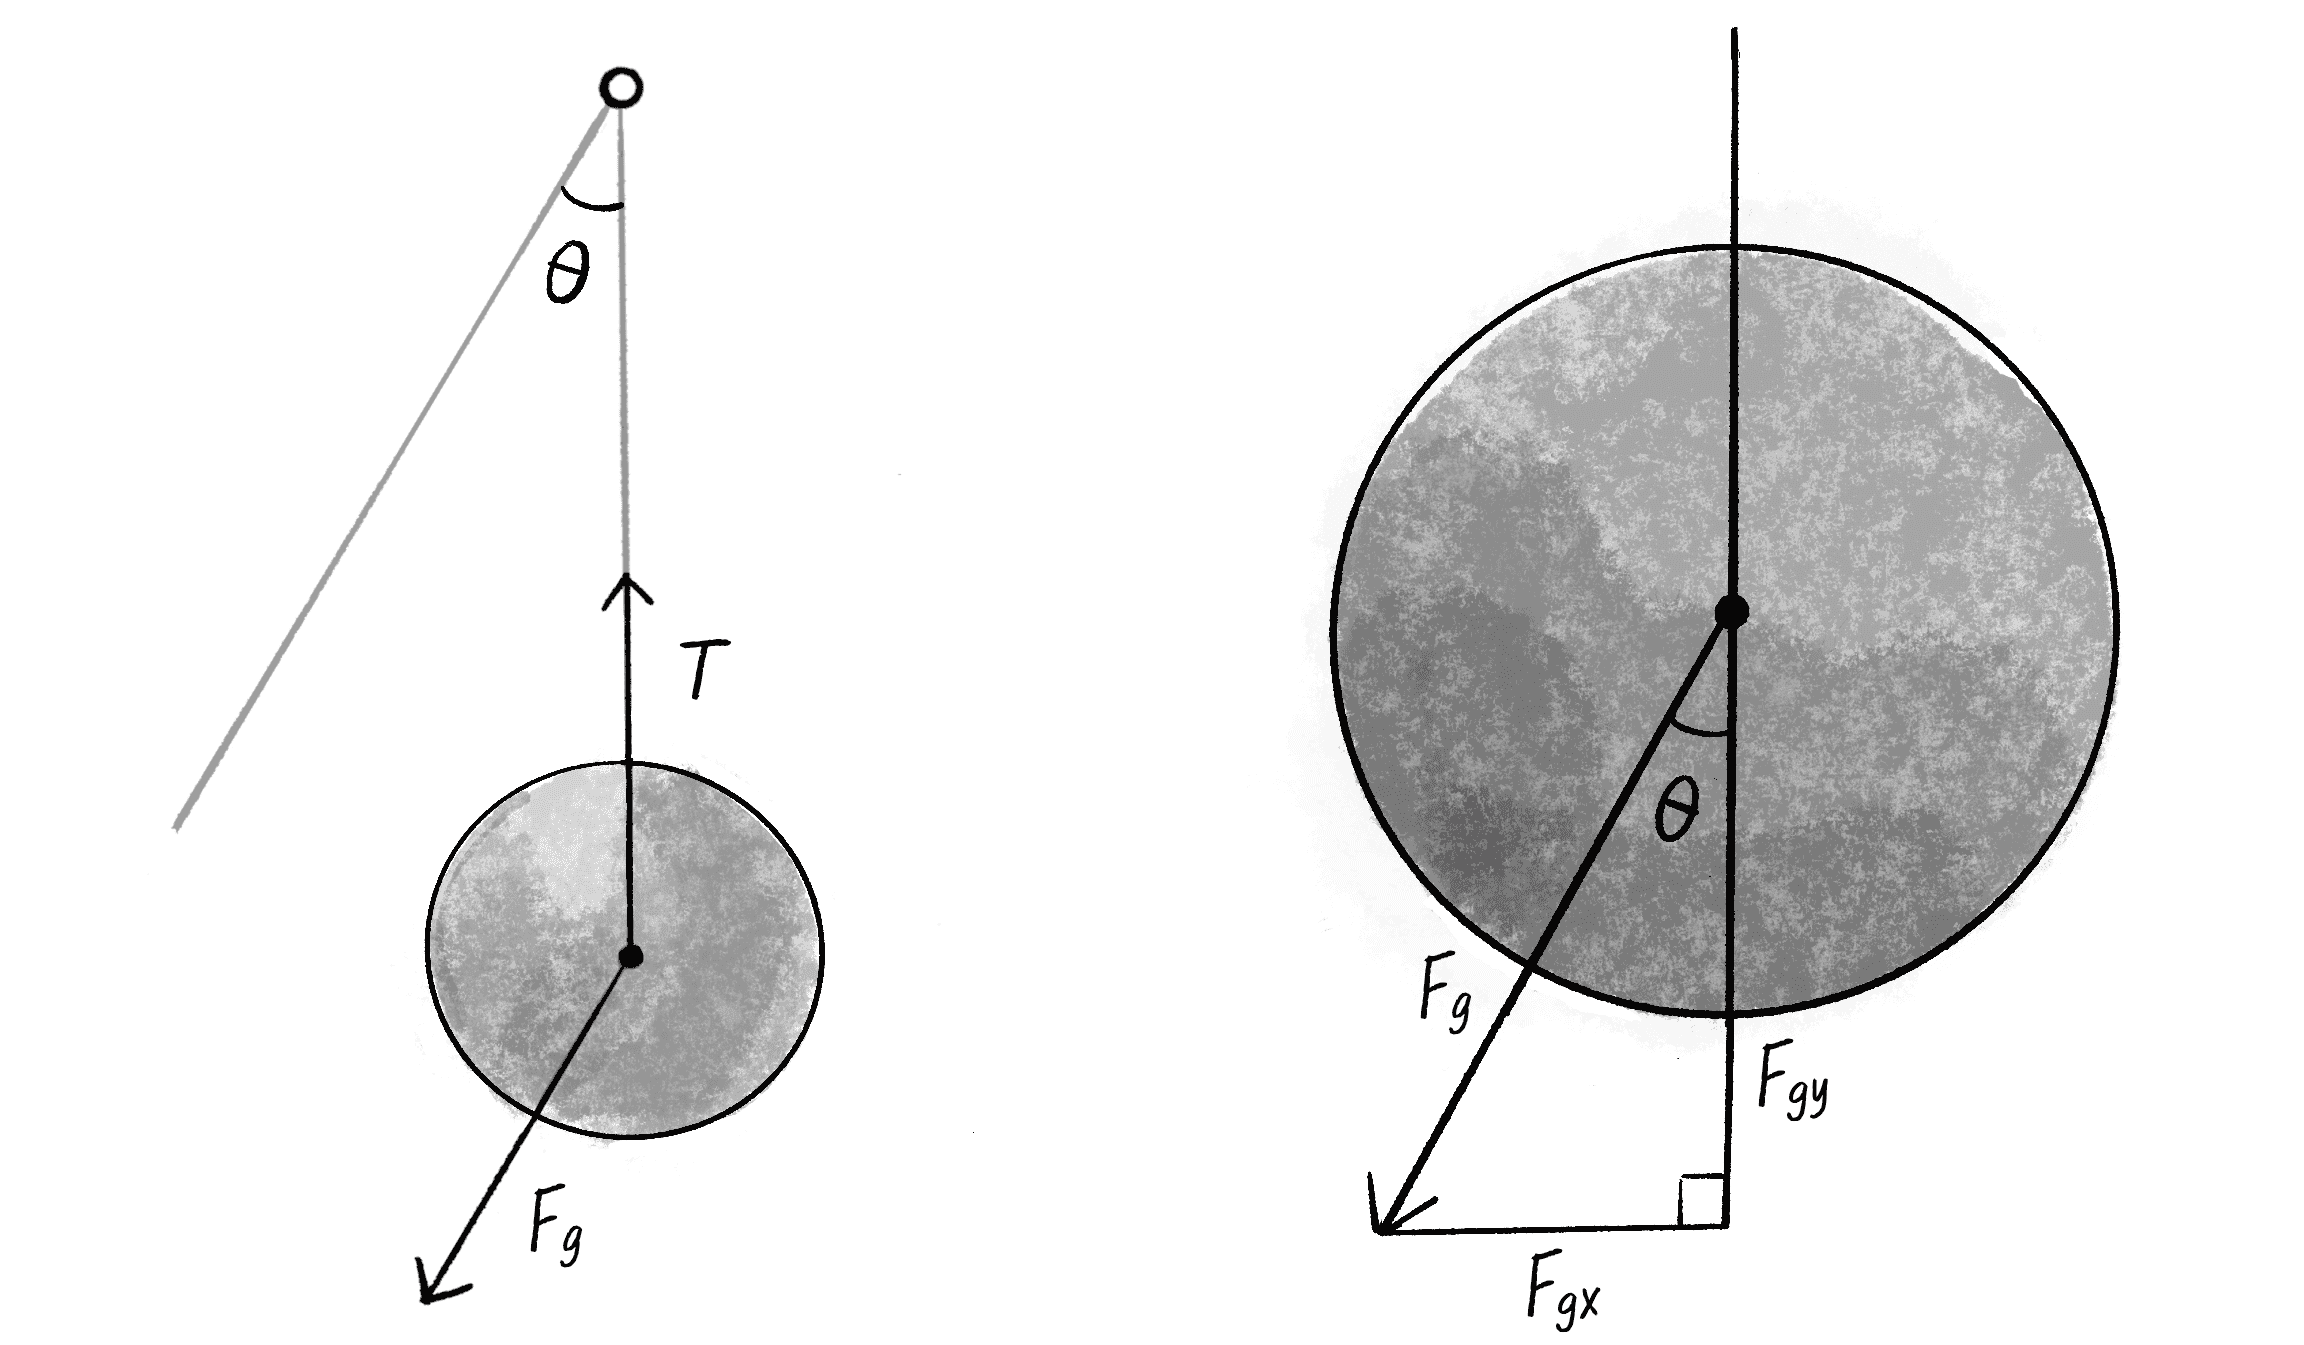 Figure 3.20: On the left, the pendulum is drawn rotated so that the arm is the y-axis. The right shows F_g zoomed in and divided into components F_{gx} and F_{gy}.